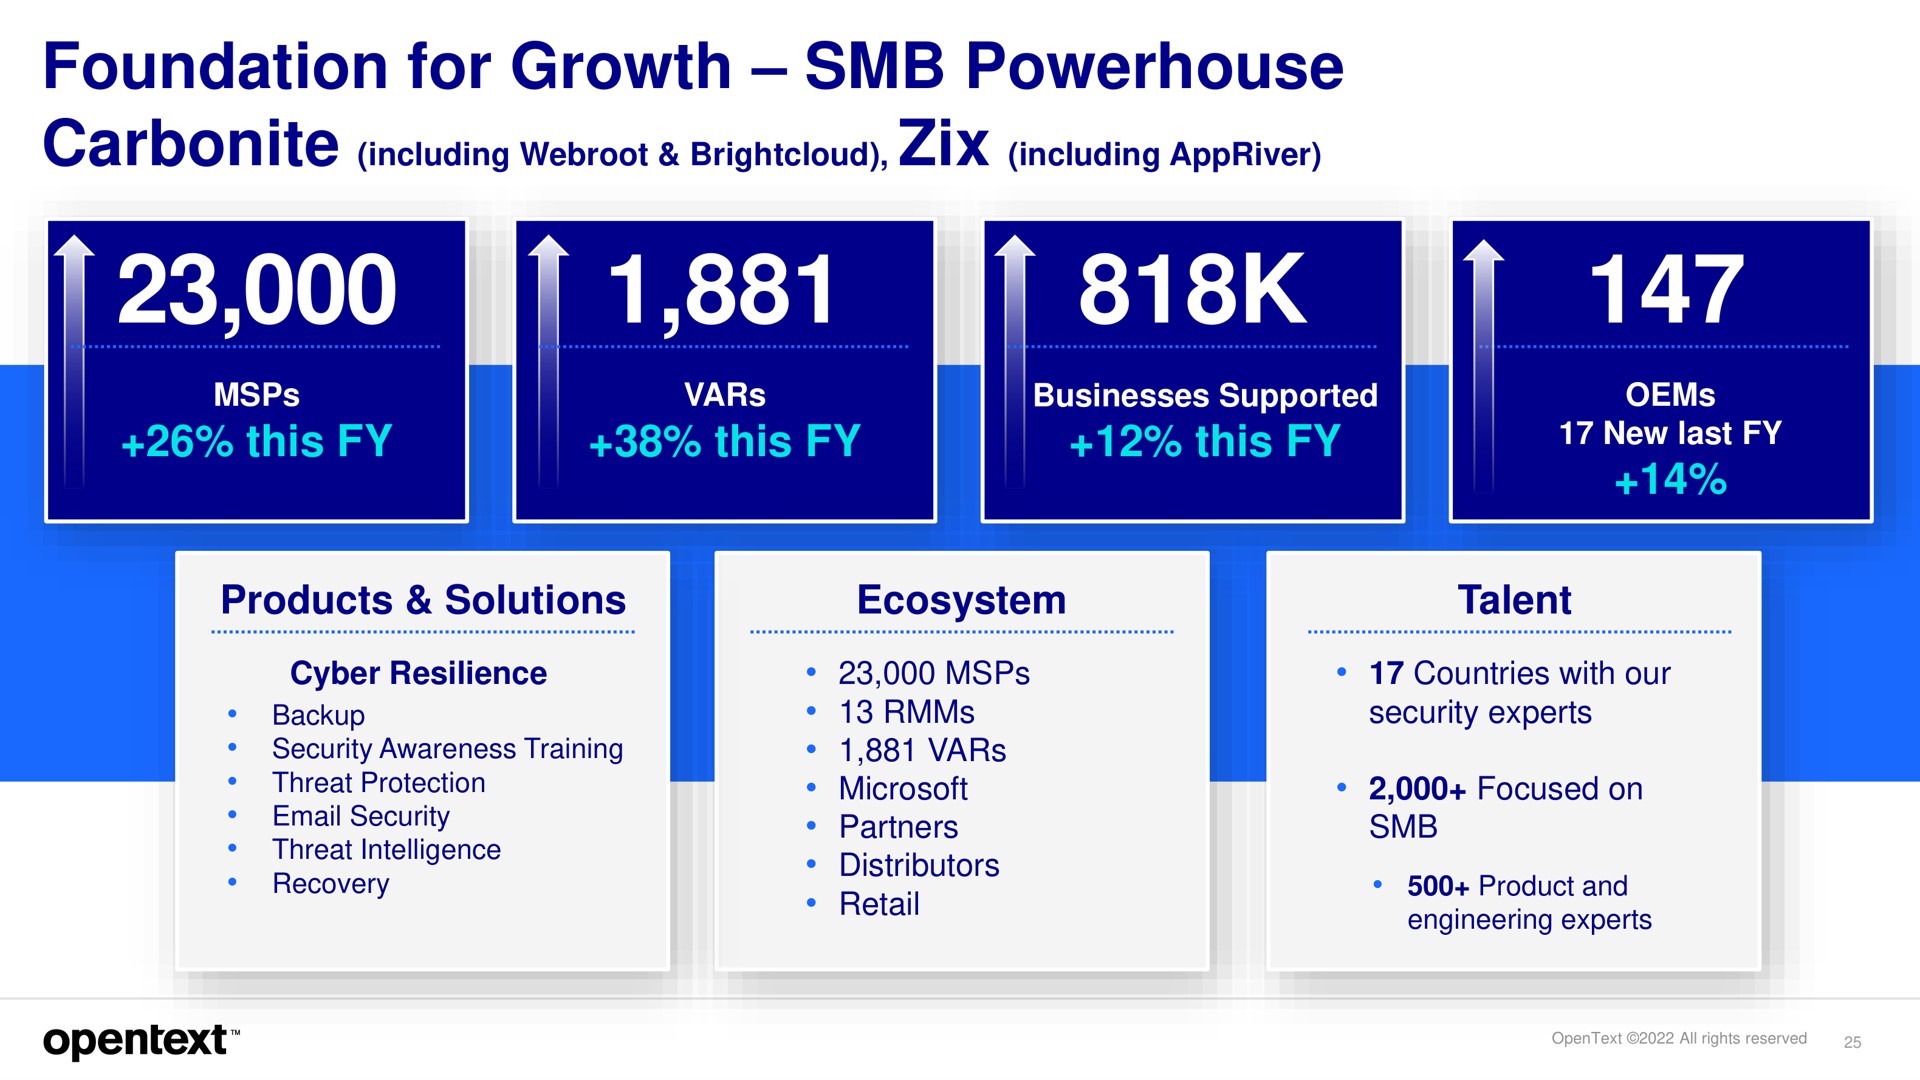 foundation for growth powerhouse this this this products solutions ecosystem talent carbonite including toe see | OpenText